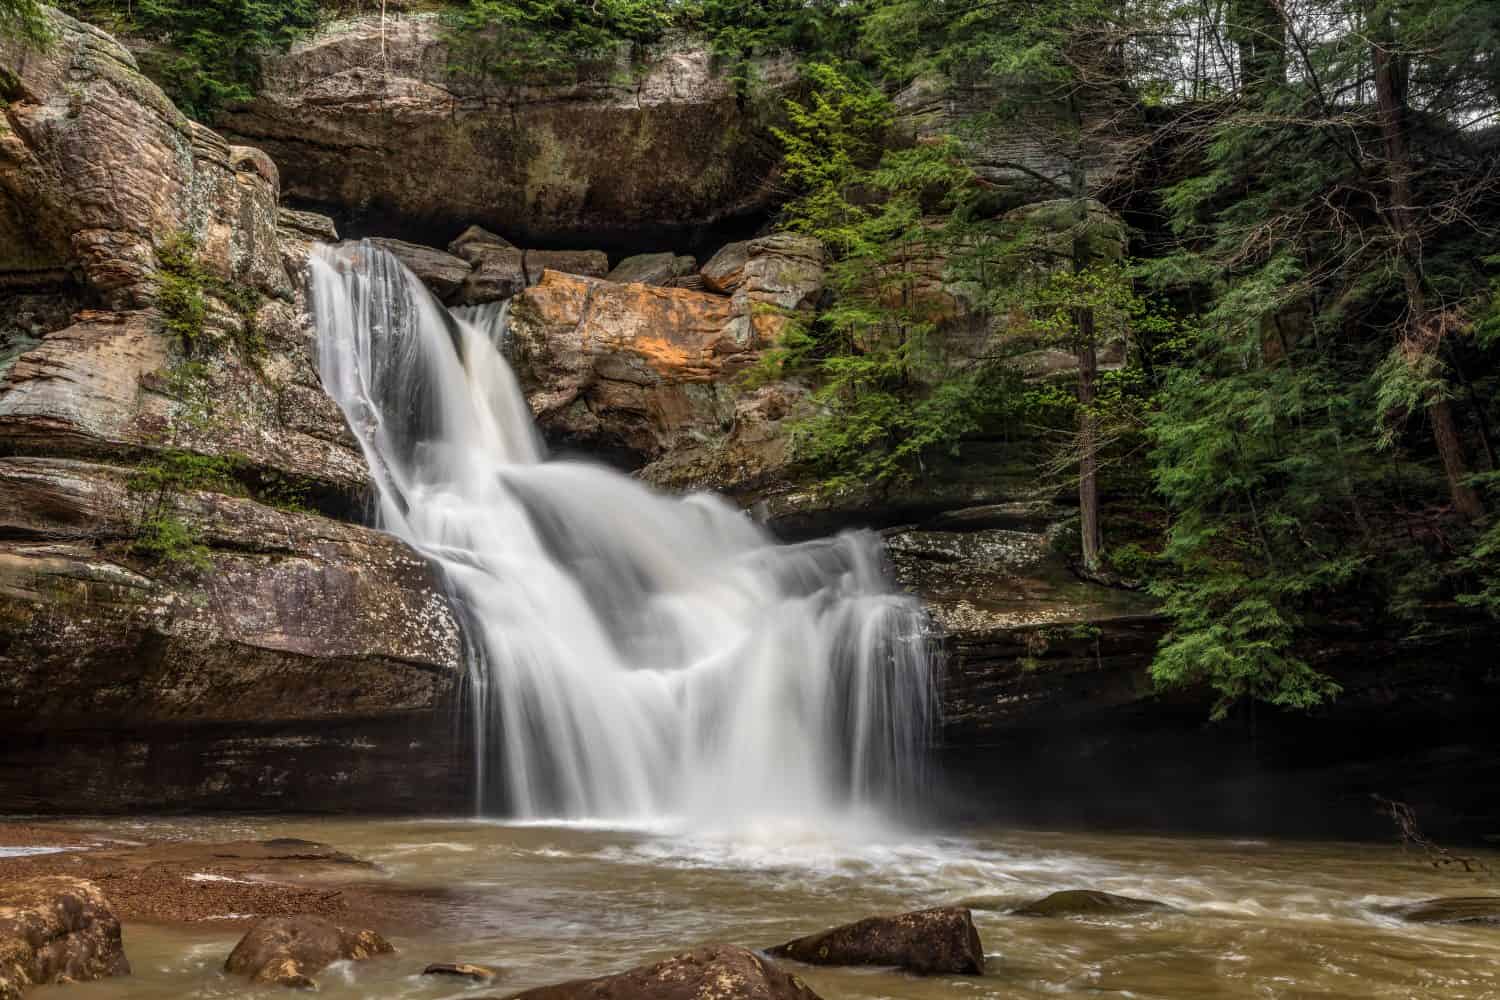 Cedar falls, a beautiful waterfall in the Hocking Hills of Ohio, flows strongly after heavy spring rains.